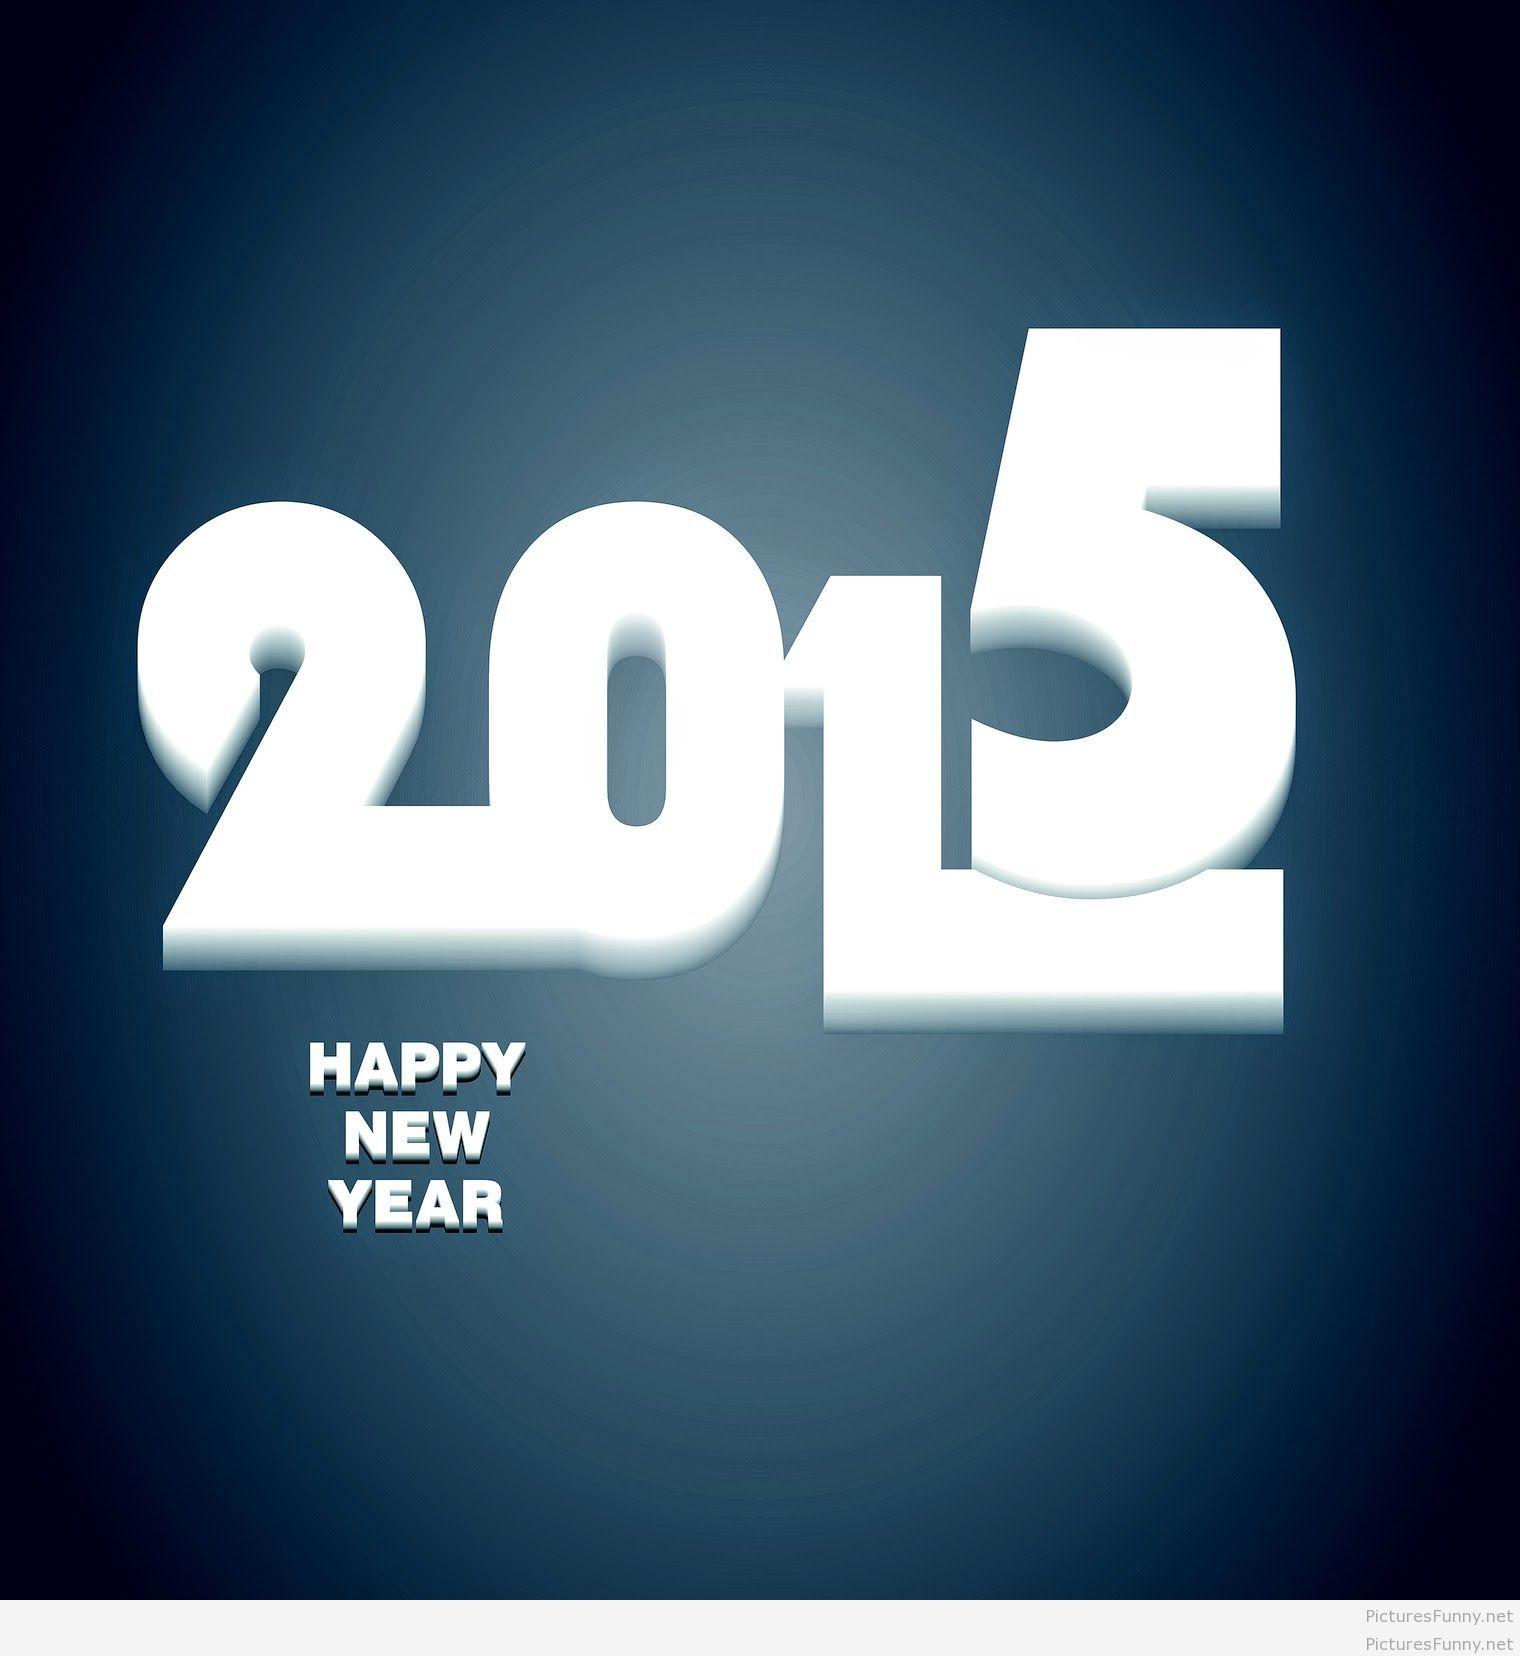 Cool style 2015 New Year wallpaper